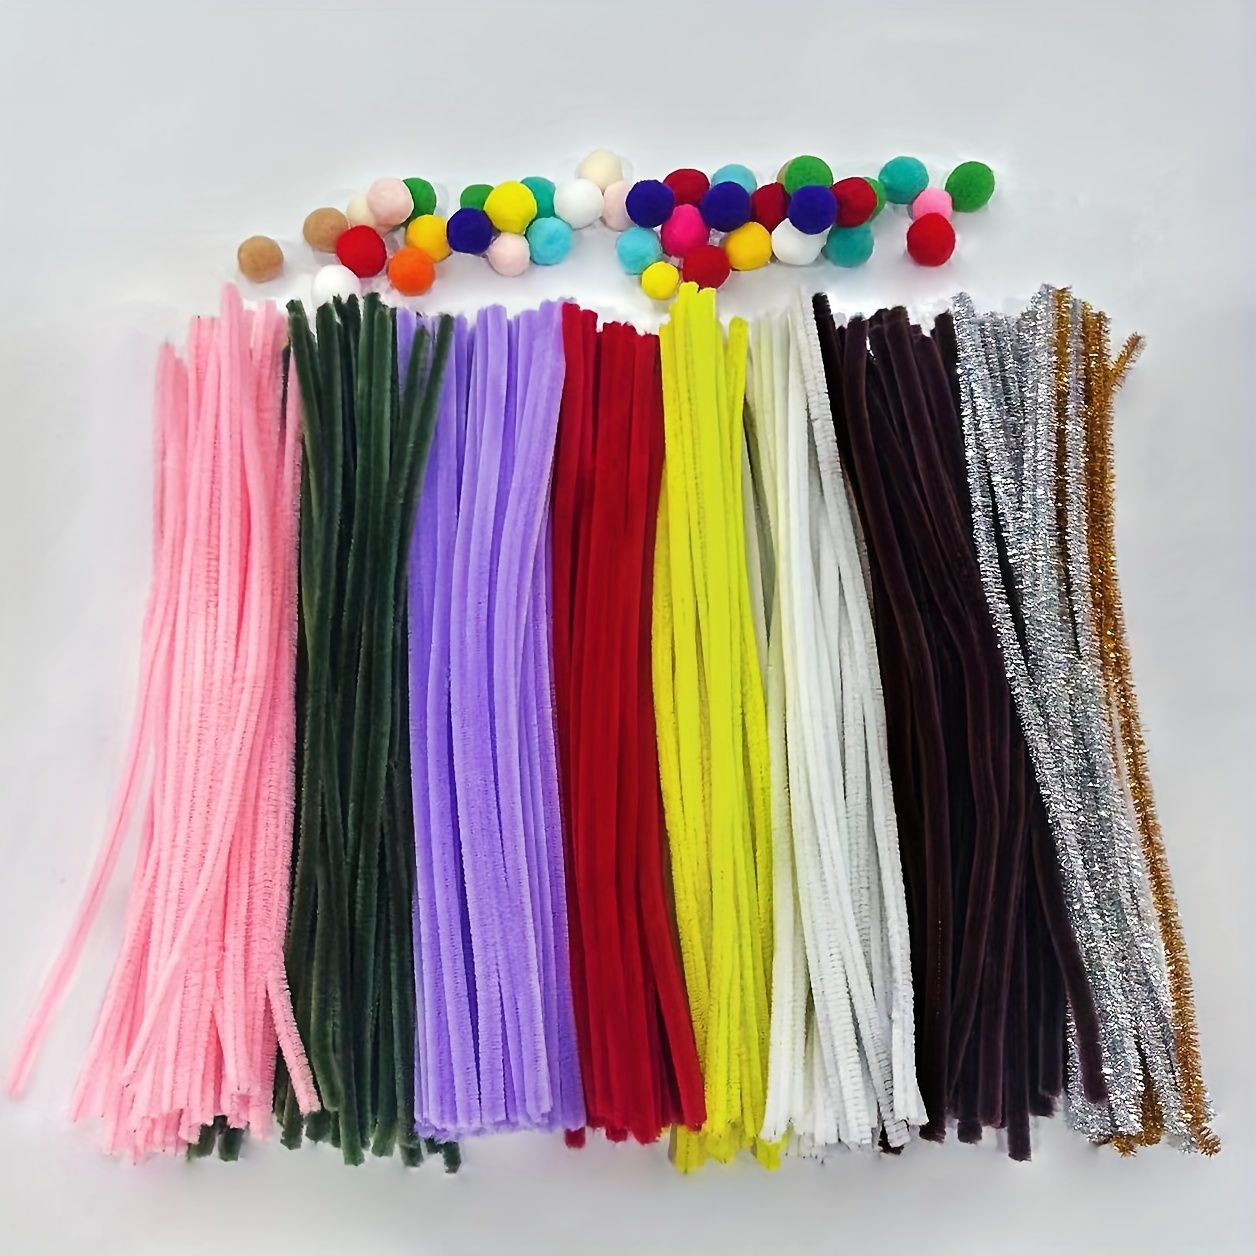 Black Pipe Cleaners, 100psc Pipe Cleaners Craft Supplies, Chenille Stems,  Pipe Cleaners for Crafts, Art and Craft Supplies 